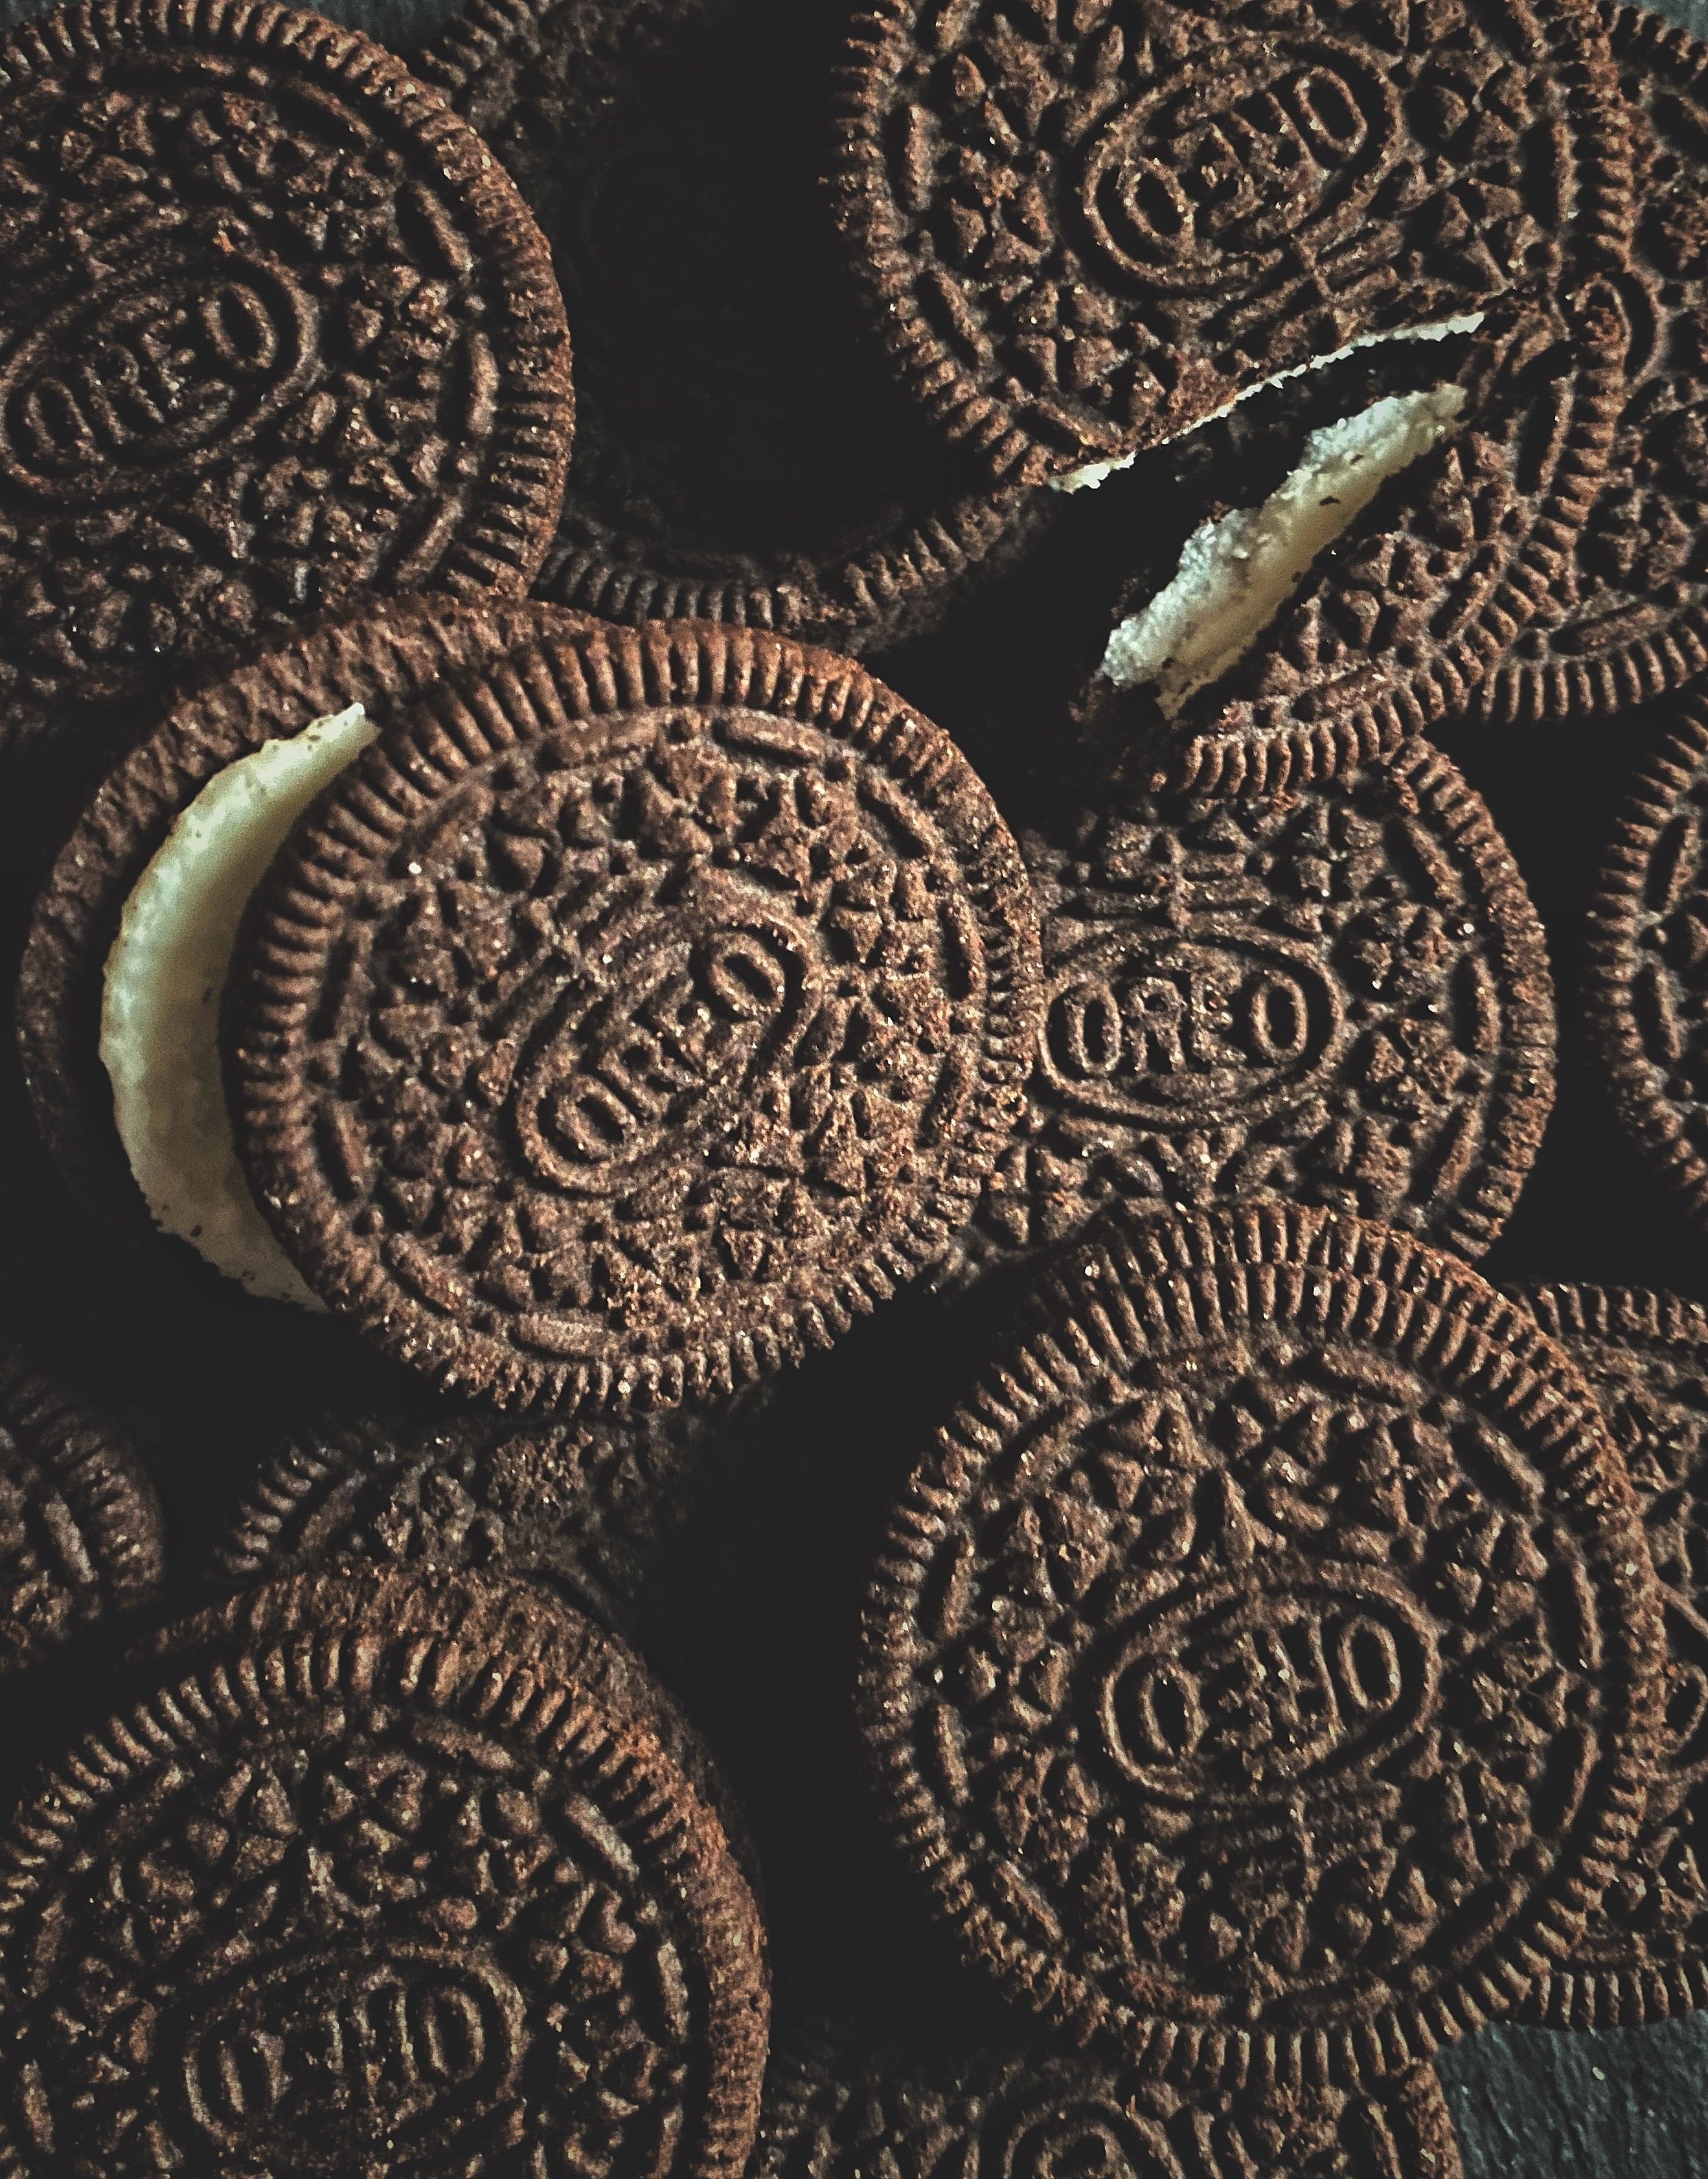 A pile of oreo cookies with some missing - Oreo